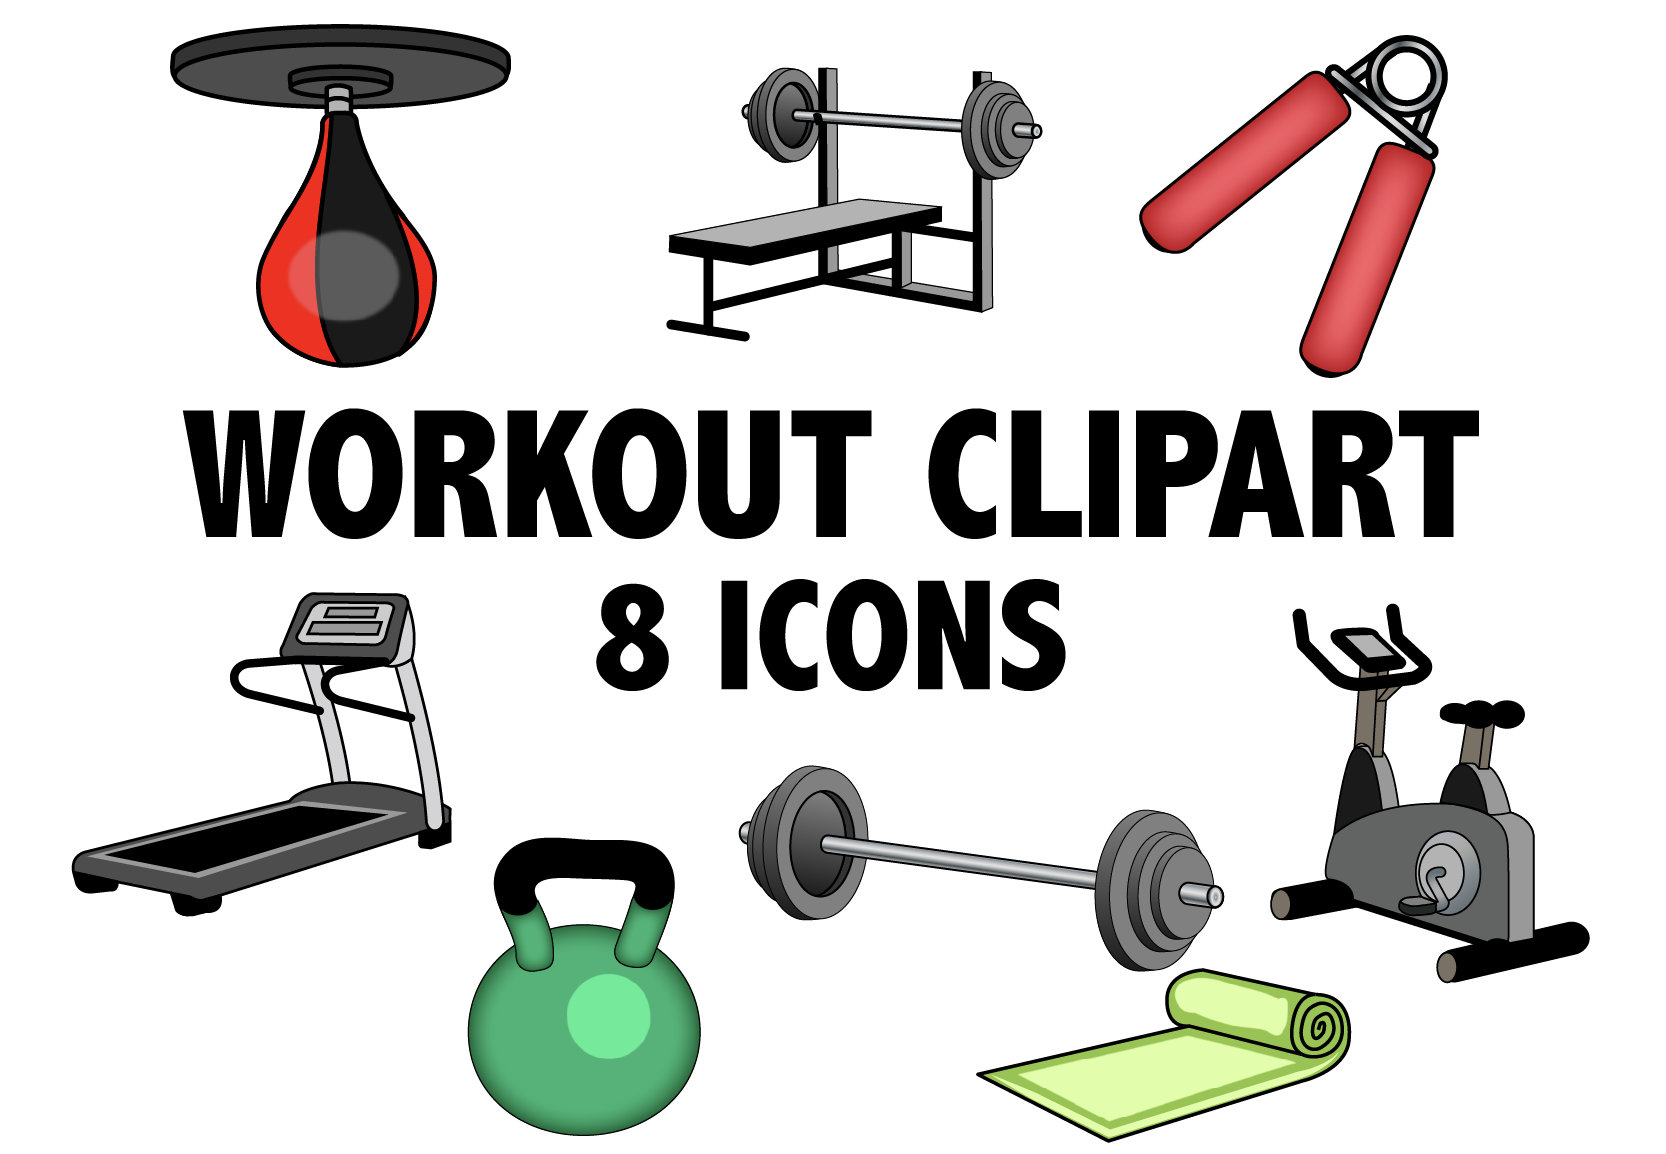 Gym Equipment Clipart | peacecommission.kdsg.gov.ng